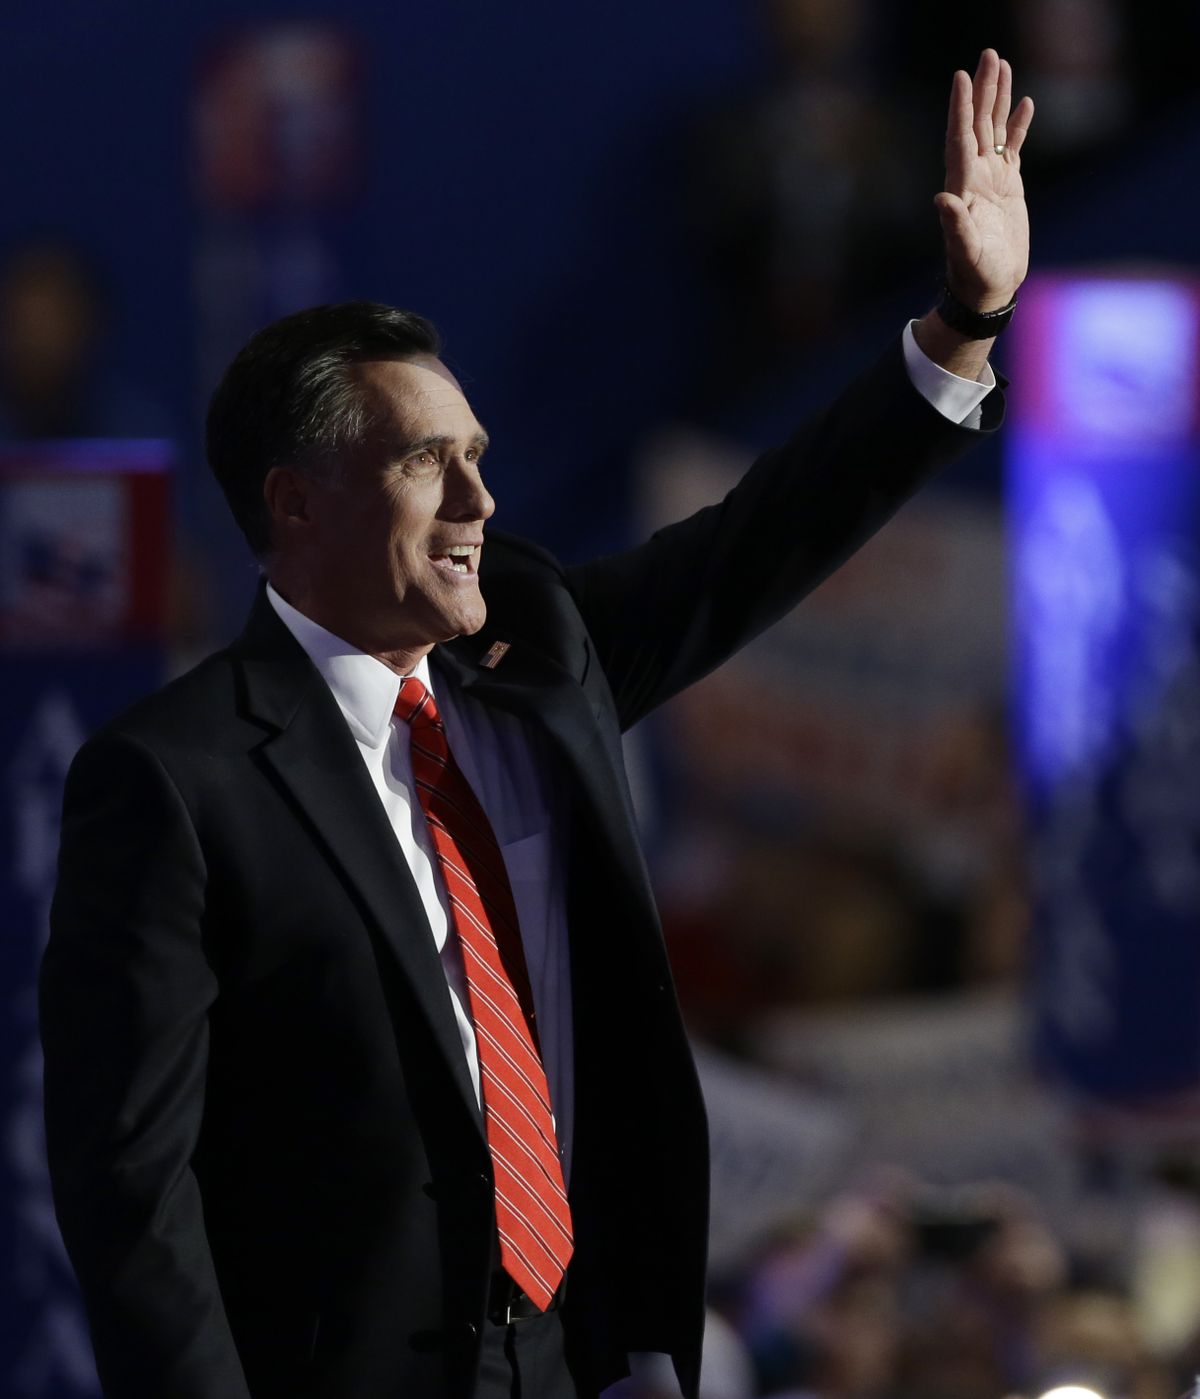 Republican presidential nominee Mitt Romney acknowledges cheering delegates during his address at the Republican National Convention in Tampa, Fla., on Thursday. (Associated Press)